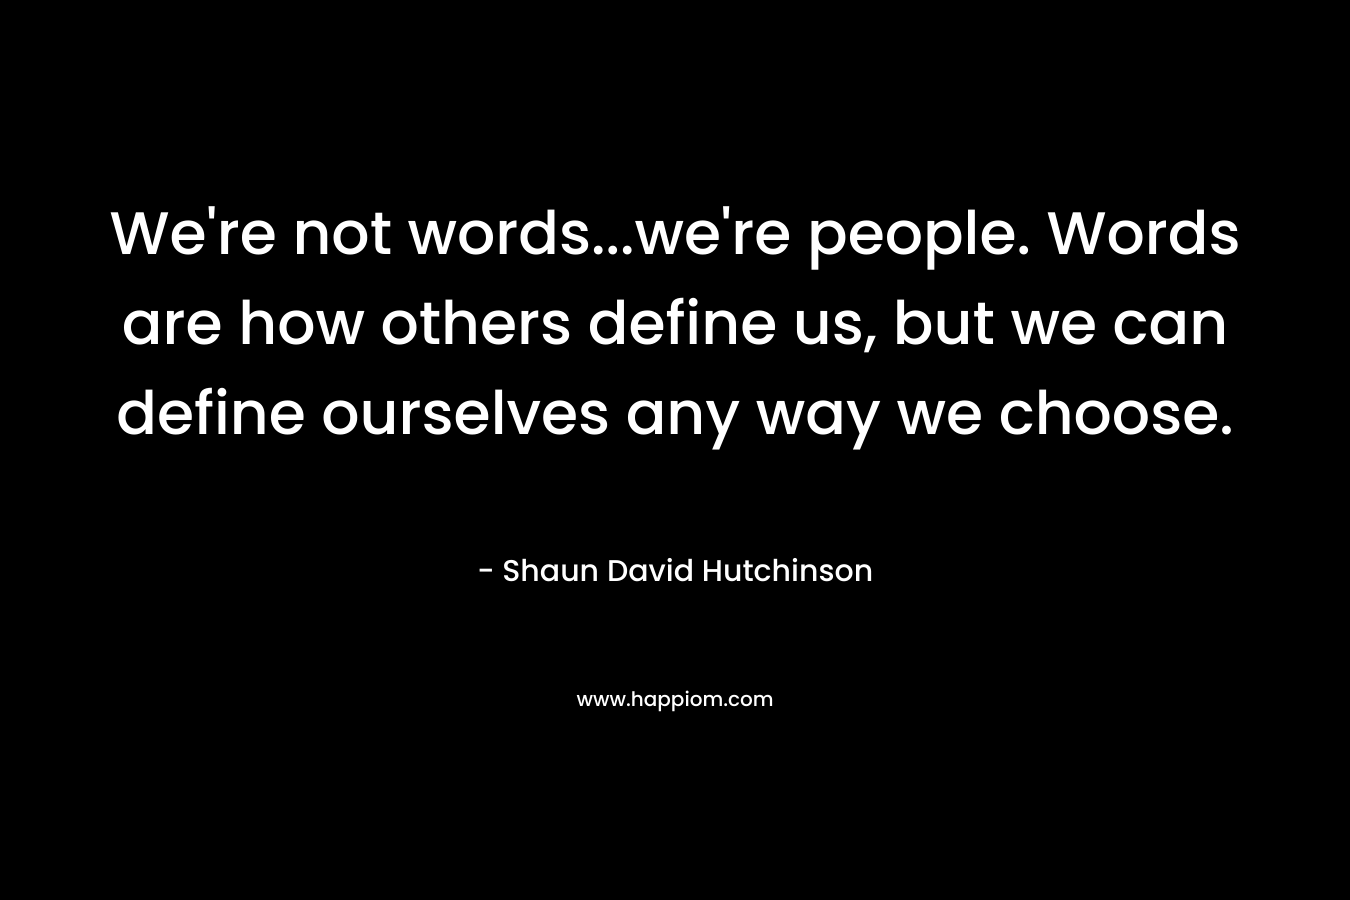 We're not words...we're people. Words are how others define us, but we can define ourselves any way we choose.